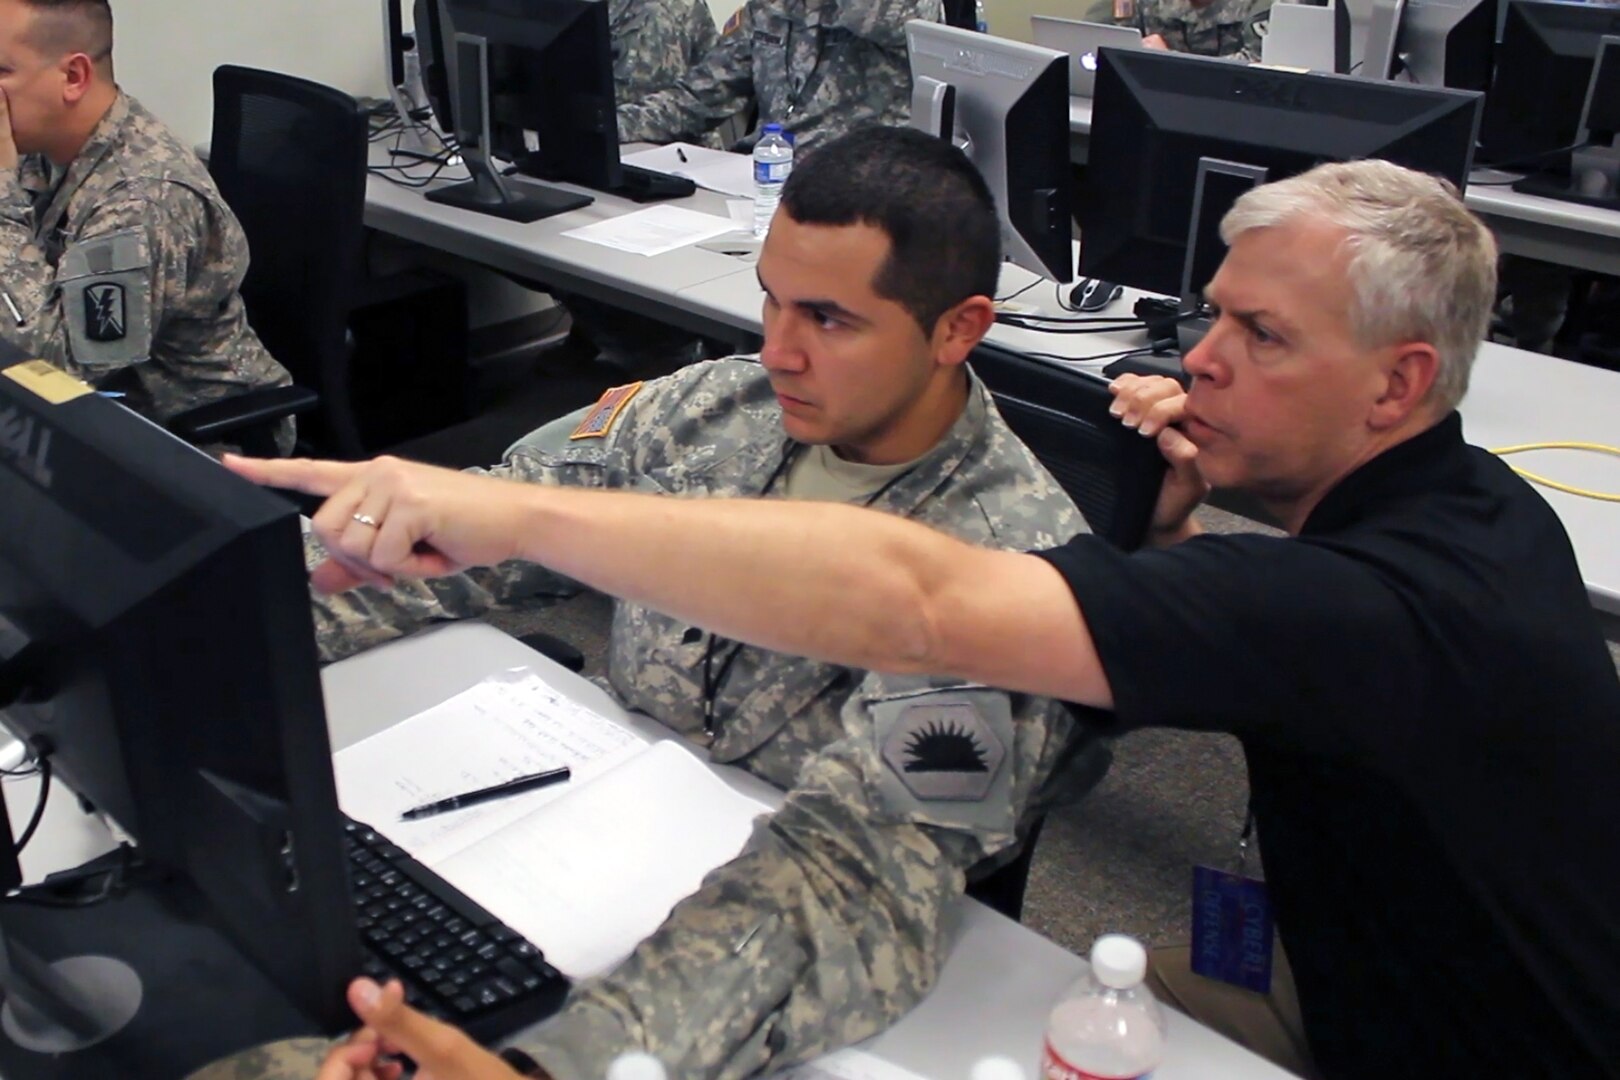 Ken Foster, a computer network analyst with the California Army National Guard Computer Network Defense Team, assists one of his fellow analysts to defend against a simulated virus attack during the 2014 Cyber Shield exercise at the National Guard Professional Education Center in North Little Rock, Ark., April 30, 2014.